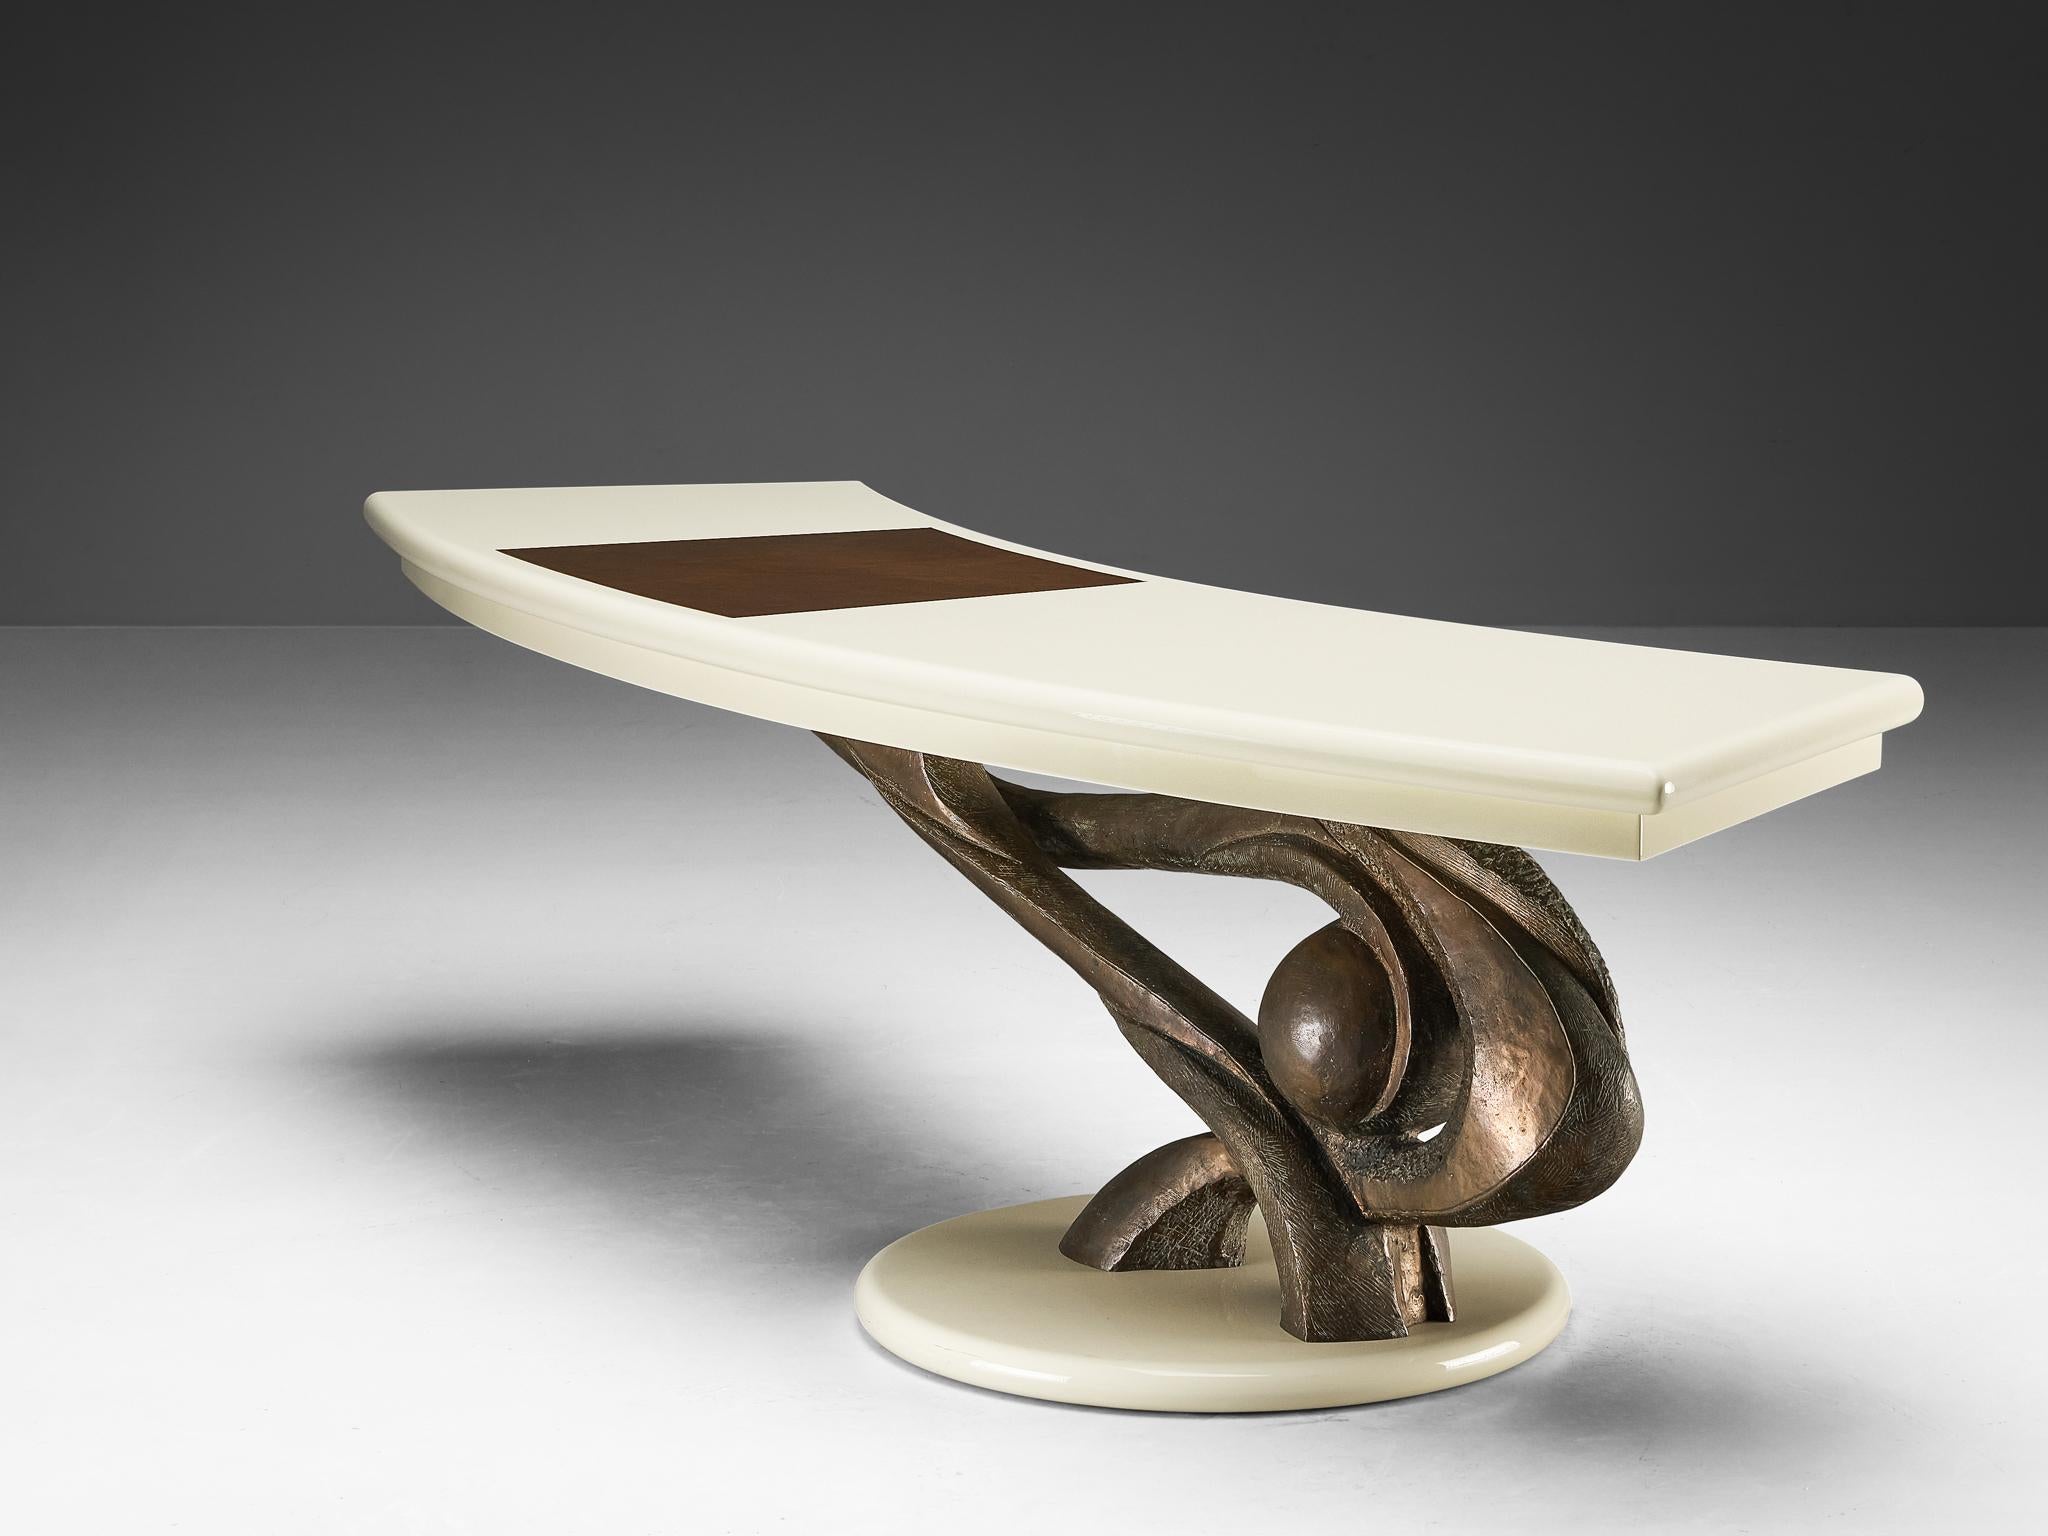 Marzio Cecchi, writing desk, lacquered wood, lacquered iron, bronze, leather, Italy, 1985
 
Italian-based designer Marzio Cecchi (1940-1990) designed this remarkable office set that is a feast for the eyes. The office desk stands out for its